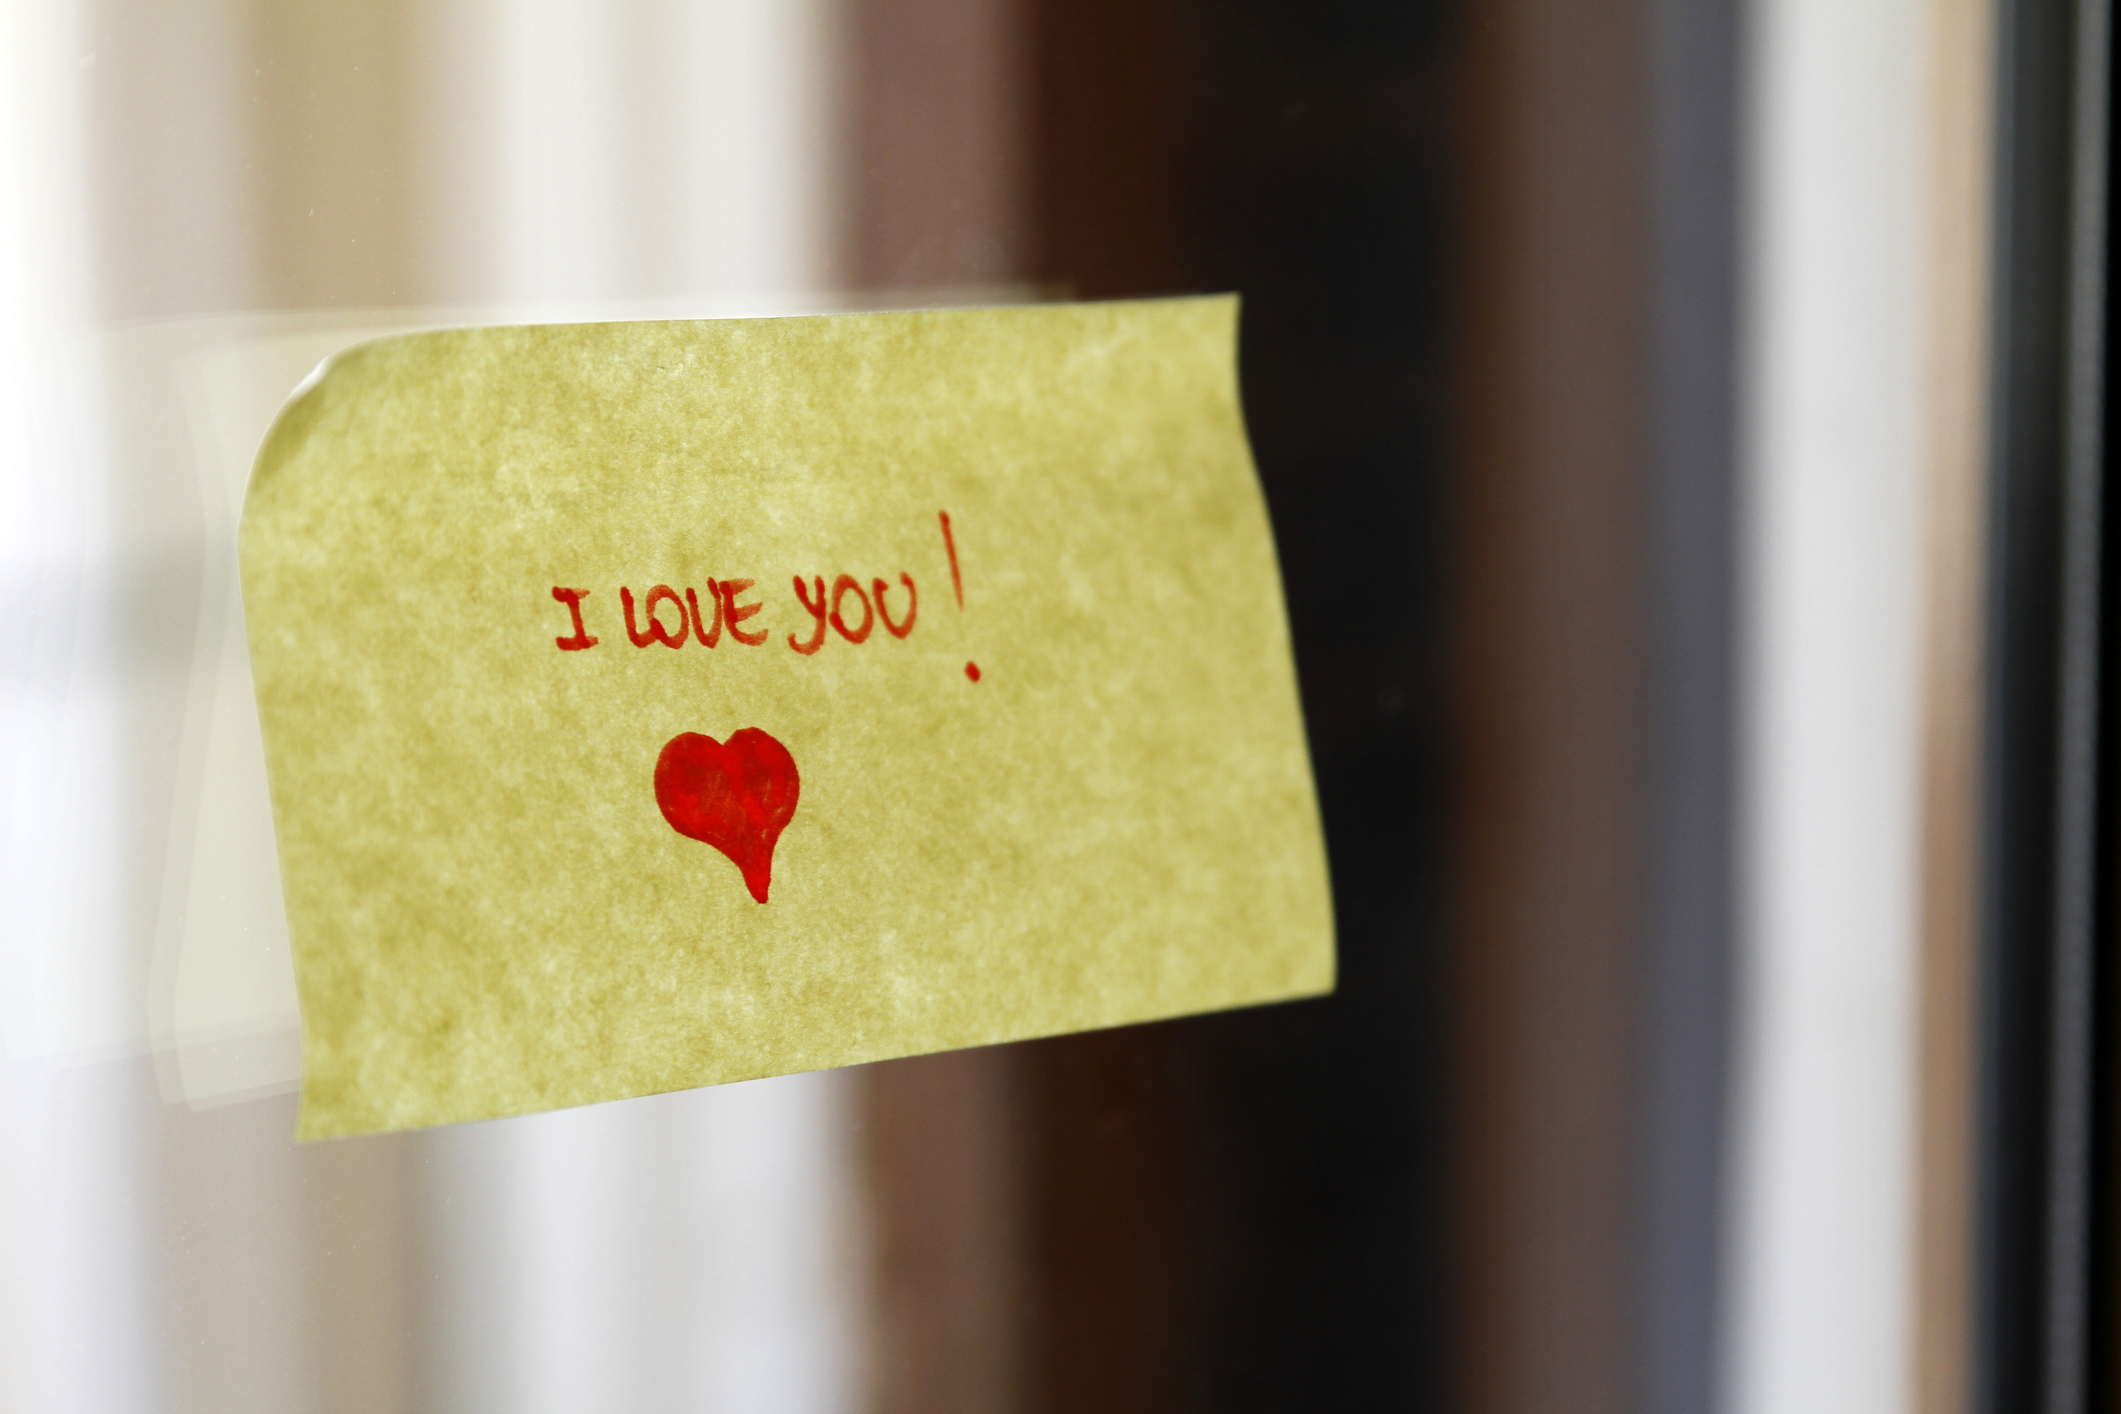 Sticky note on a surface with &quot;I love you!&quot; handwritten and a small heart drawn below the text